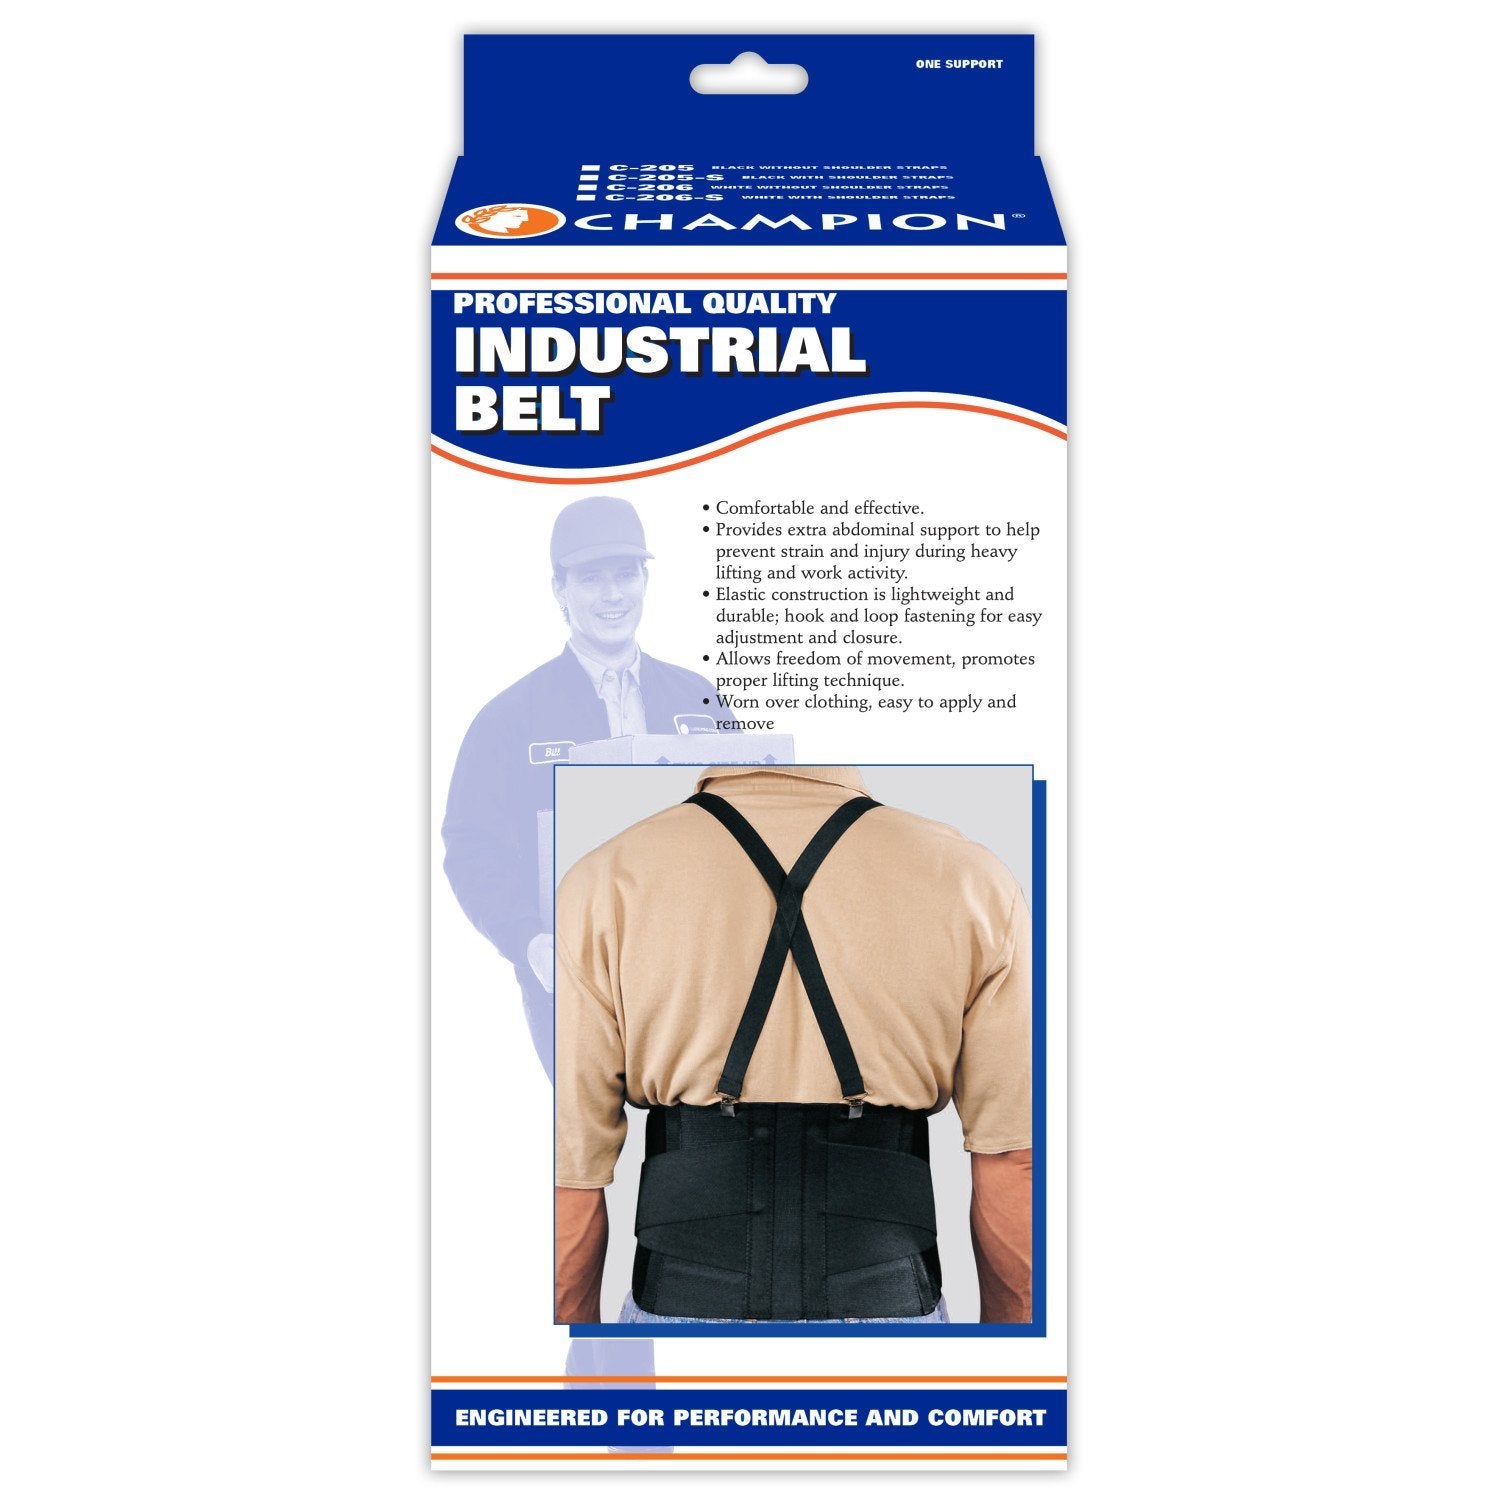 AIR 0205WH-L EA/1 CHAMPION MED SUPPORT INDUSTRIAL BELT W/ SHOULDER STRAPS  L (36-42" WAIST)  WHITE LATEX-FREE